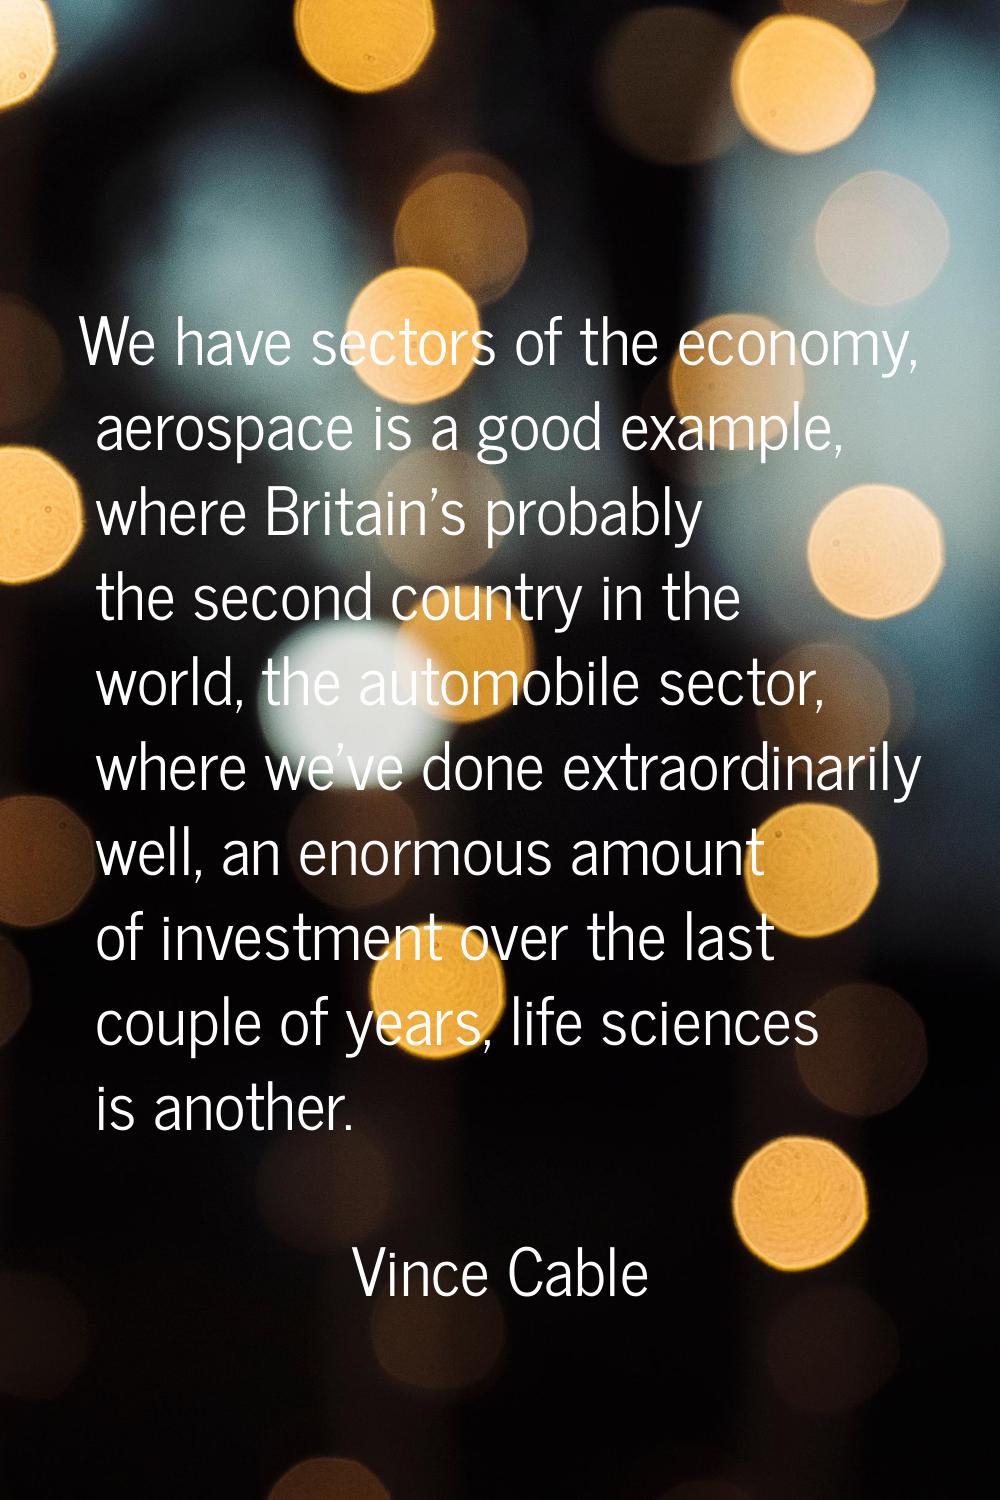 We have sectors of the economy, aerospace is a good example, where Britain's probably the second co